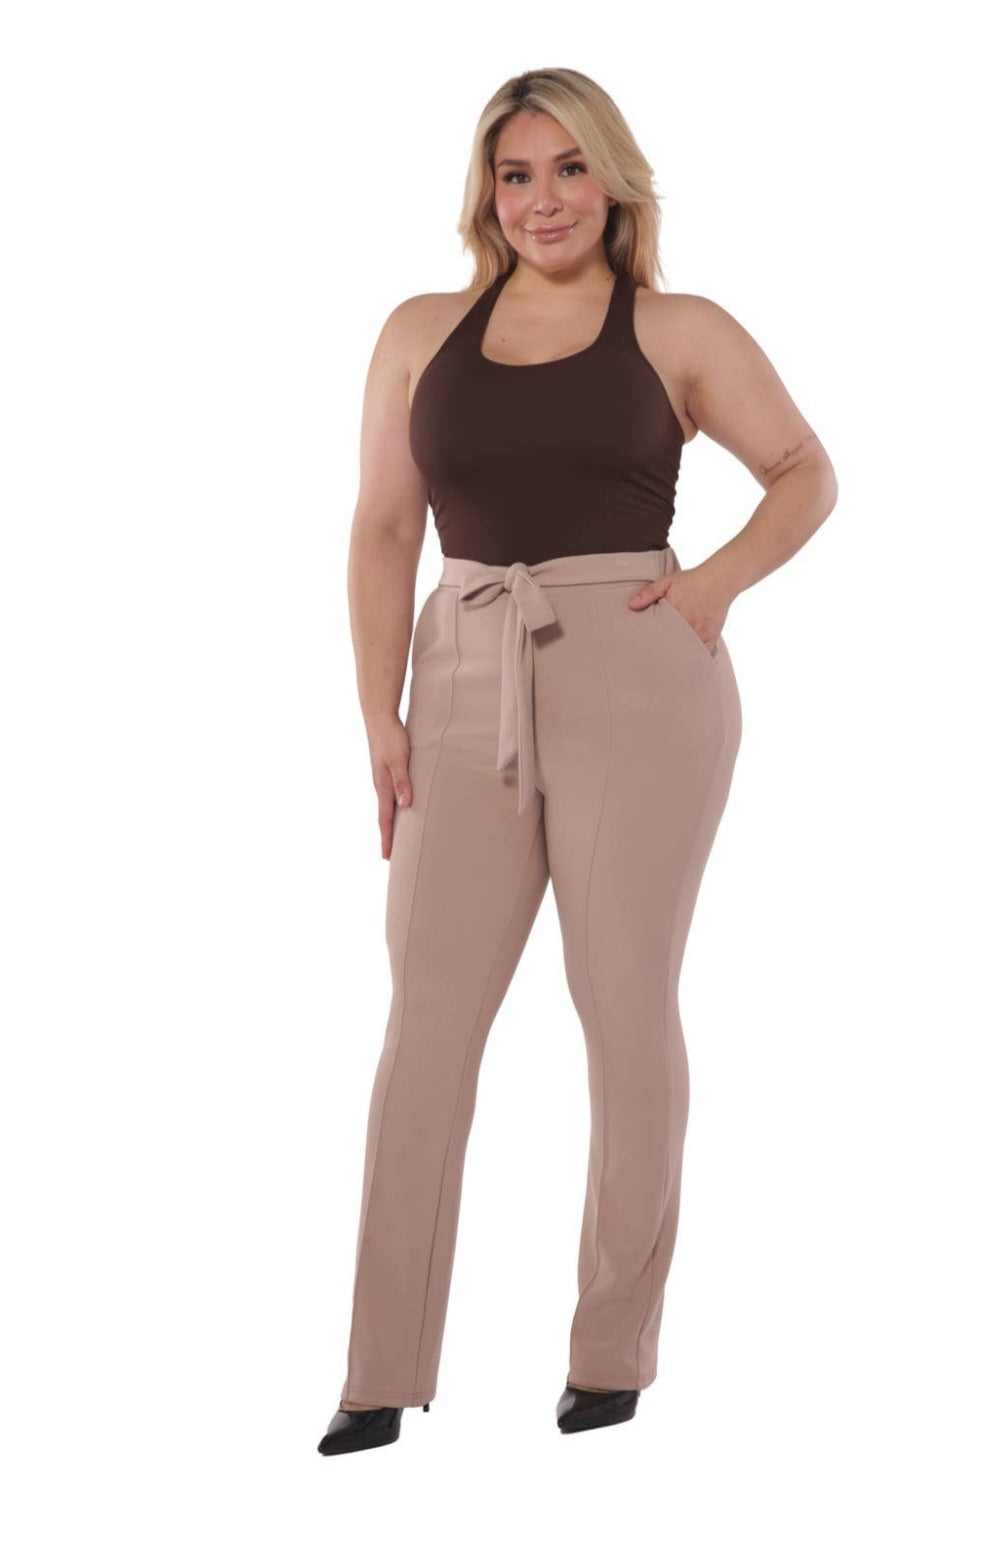 Women's flare pants with seam detail and waist tie